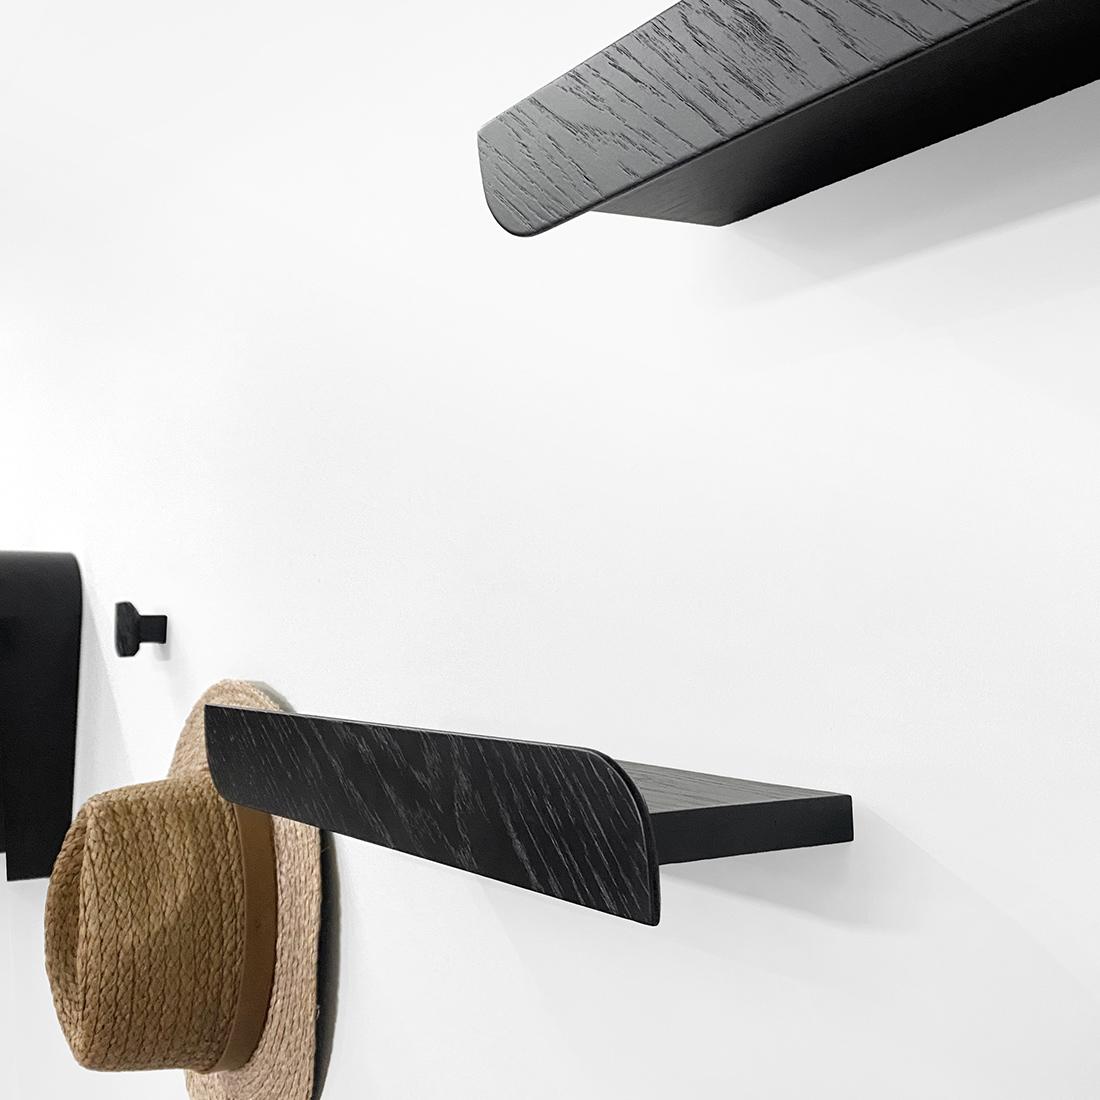 Our Cielo Shelf is a unique Minimalist wall piece perfect for placing decoration with a careful design that highlights its wood vein and includes a front ledge. Its design is complemented by the collection’s iconic leaf shape that represents